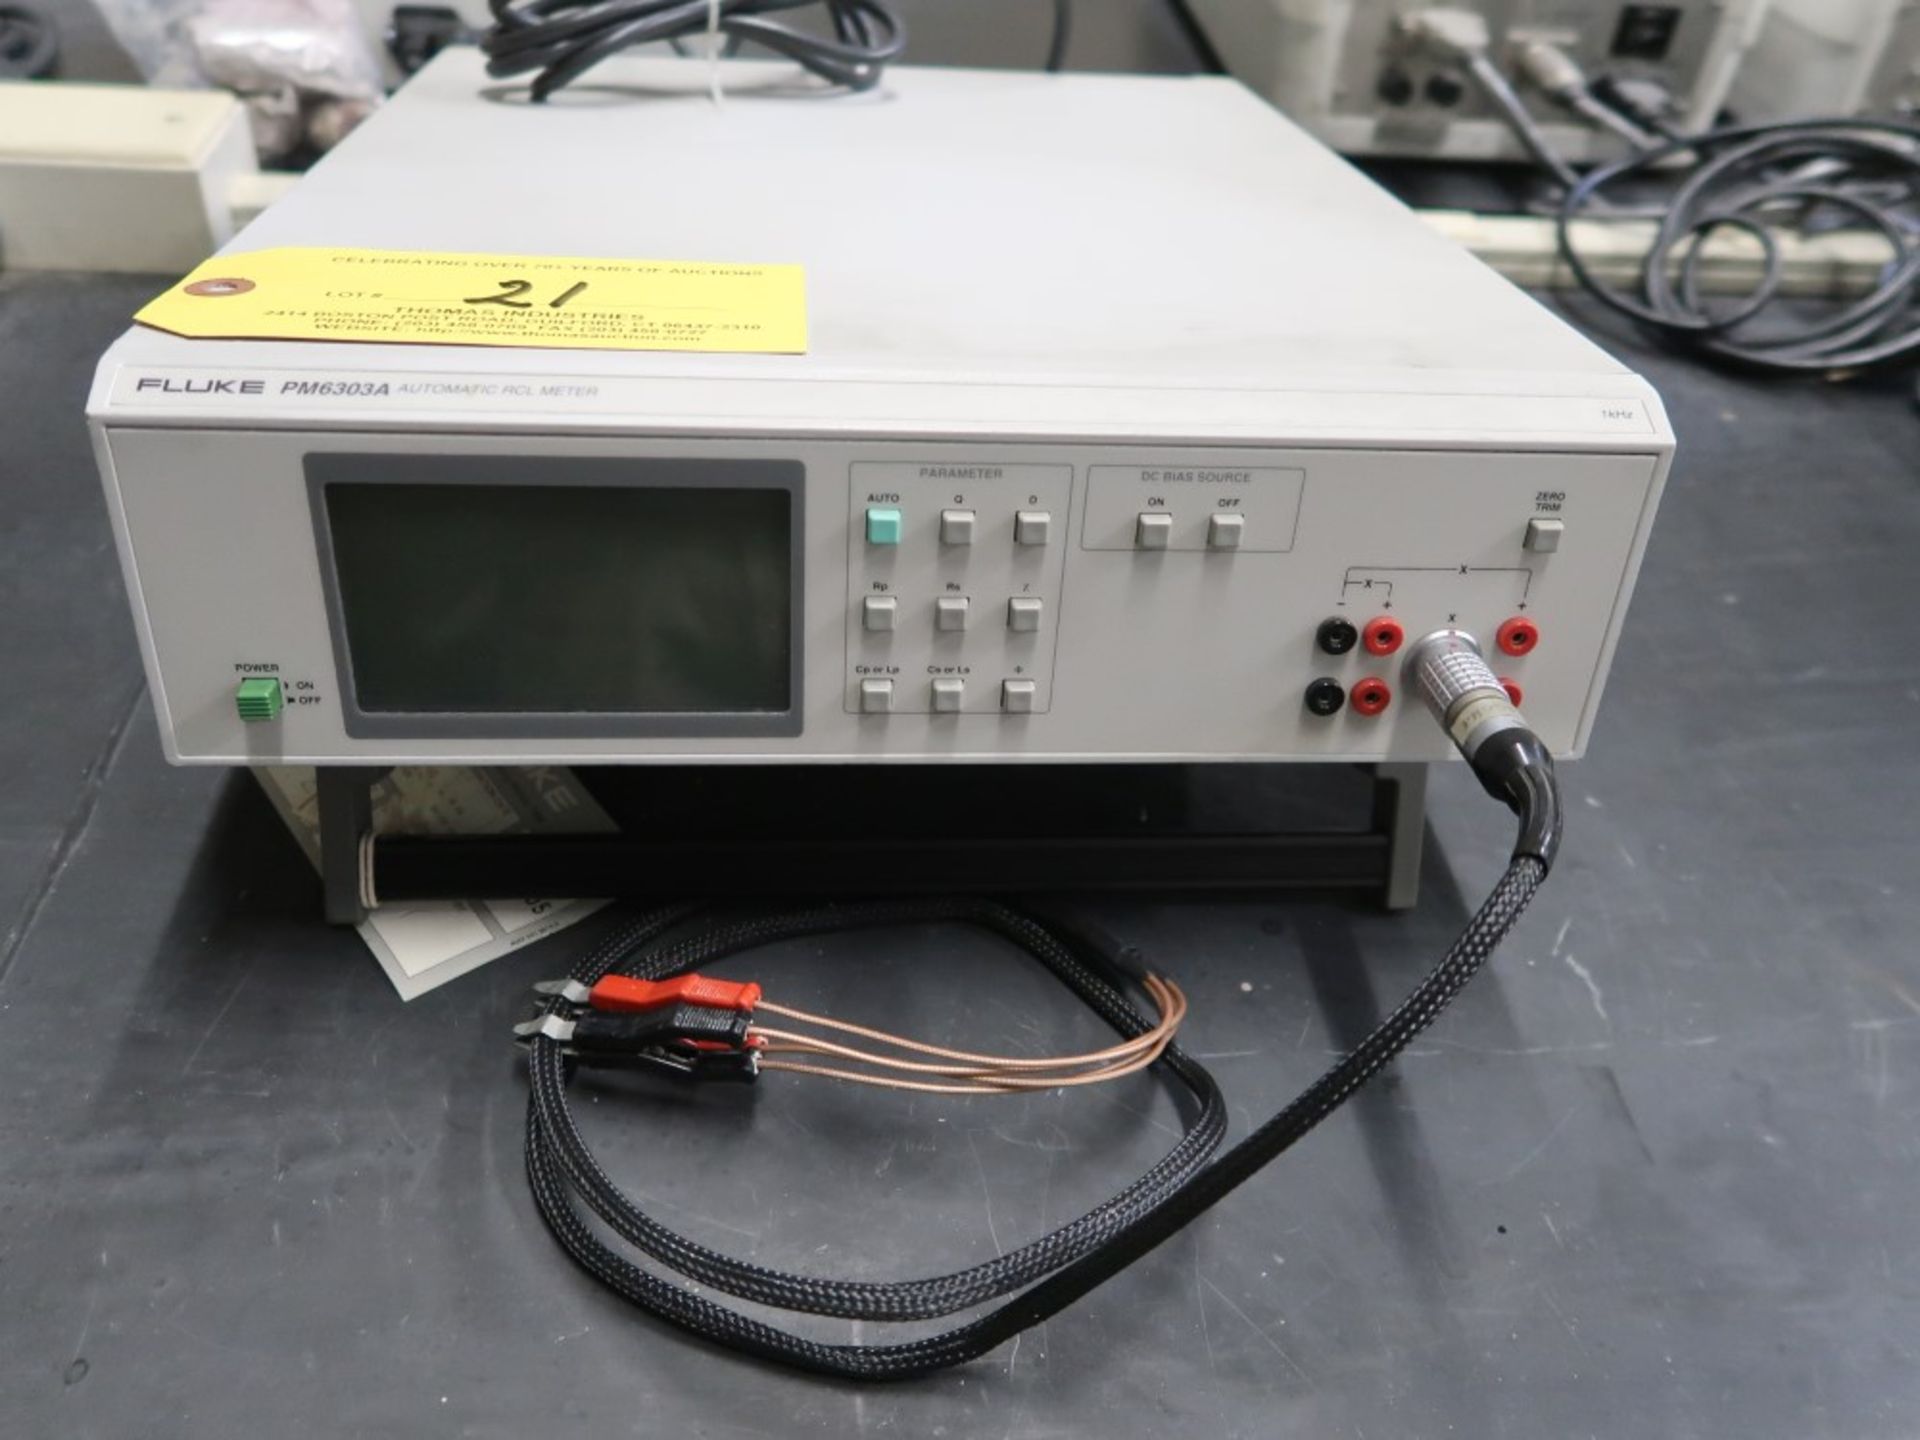 Fluke PM6303A Automatic RCL Meter